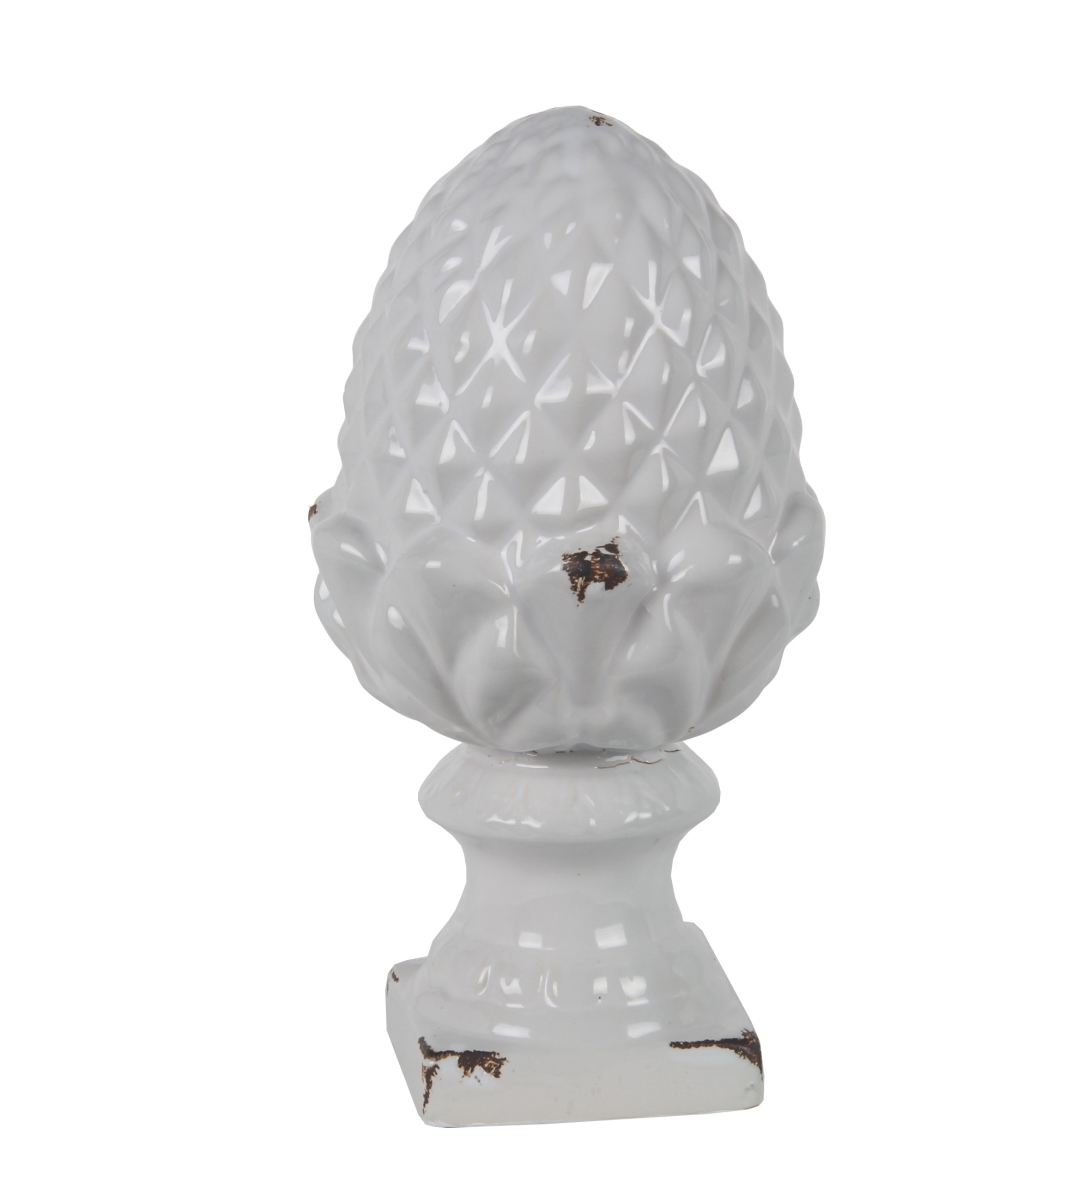 20260 6 X 6 X 11 In. Traditional Distressed Ceramic Finial Statue, White - Large